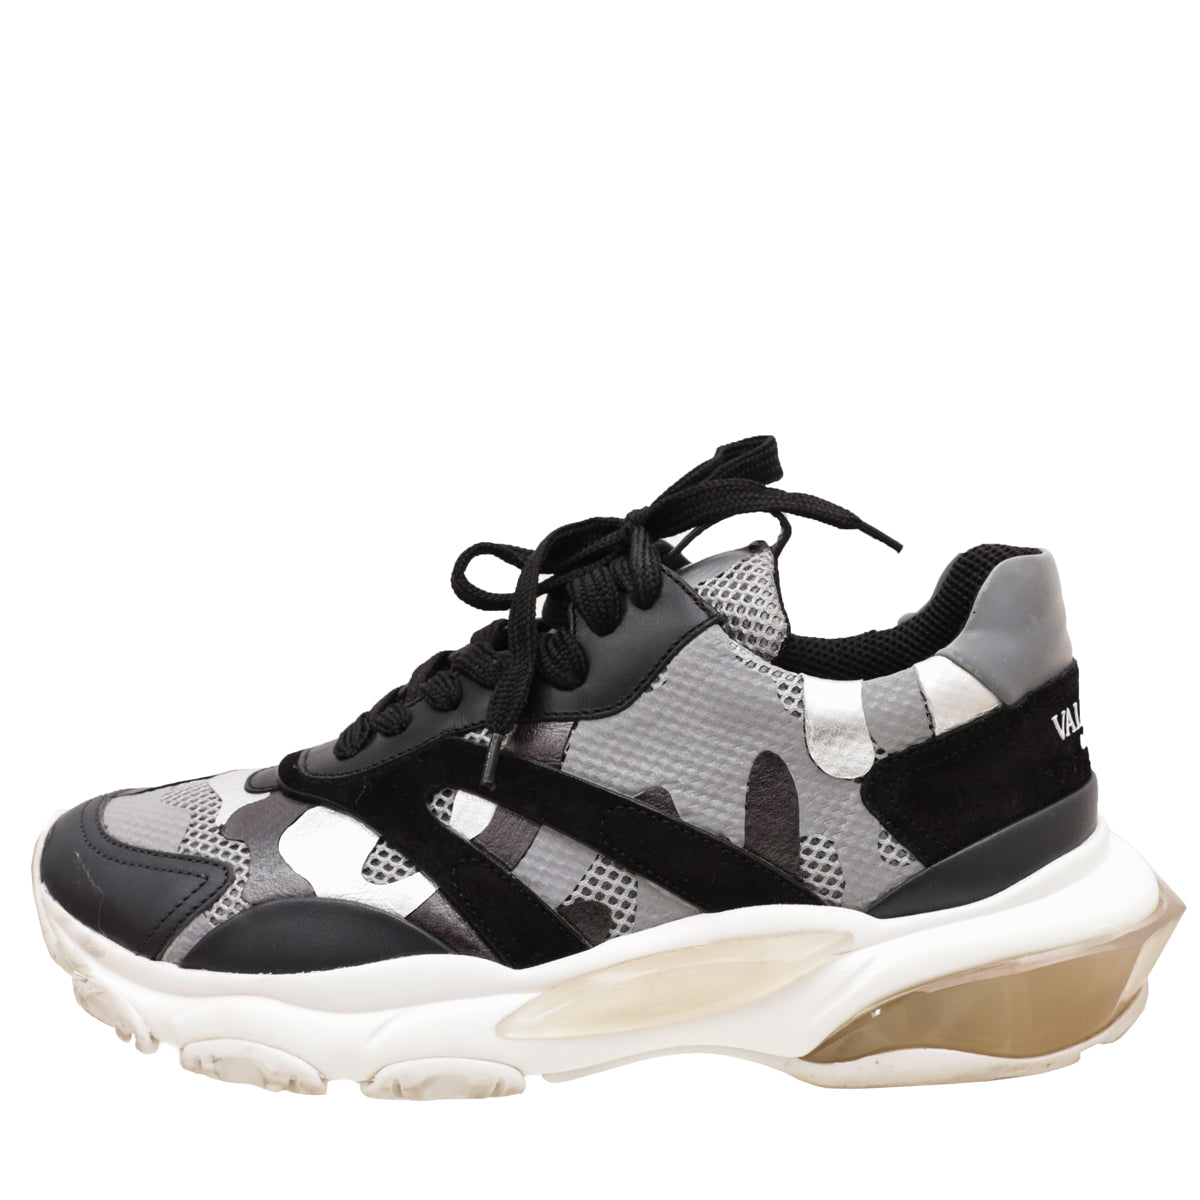 Valentino Tricolor Camou Bounce Sneakers 38.5